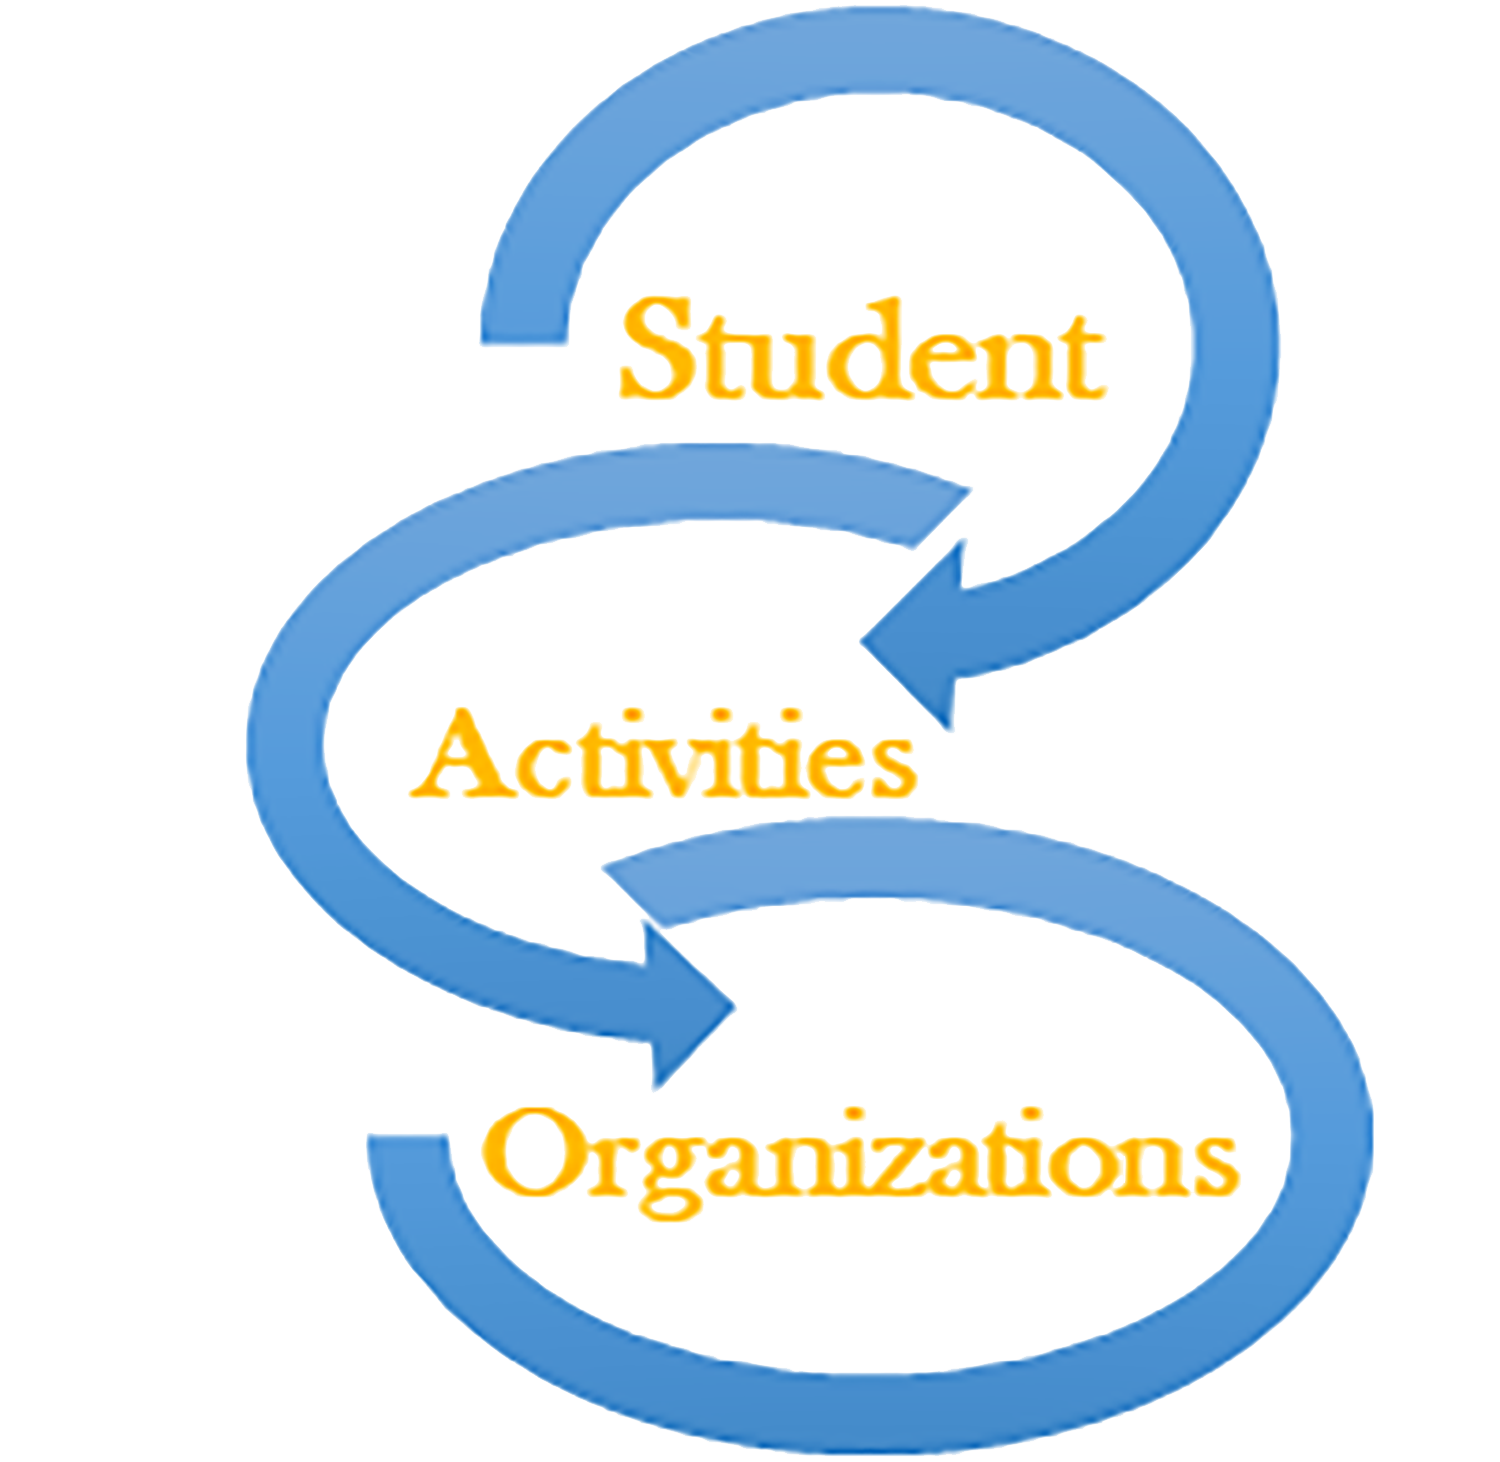 Student Activities and Organizations